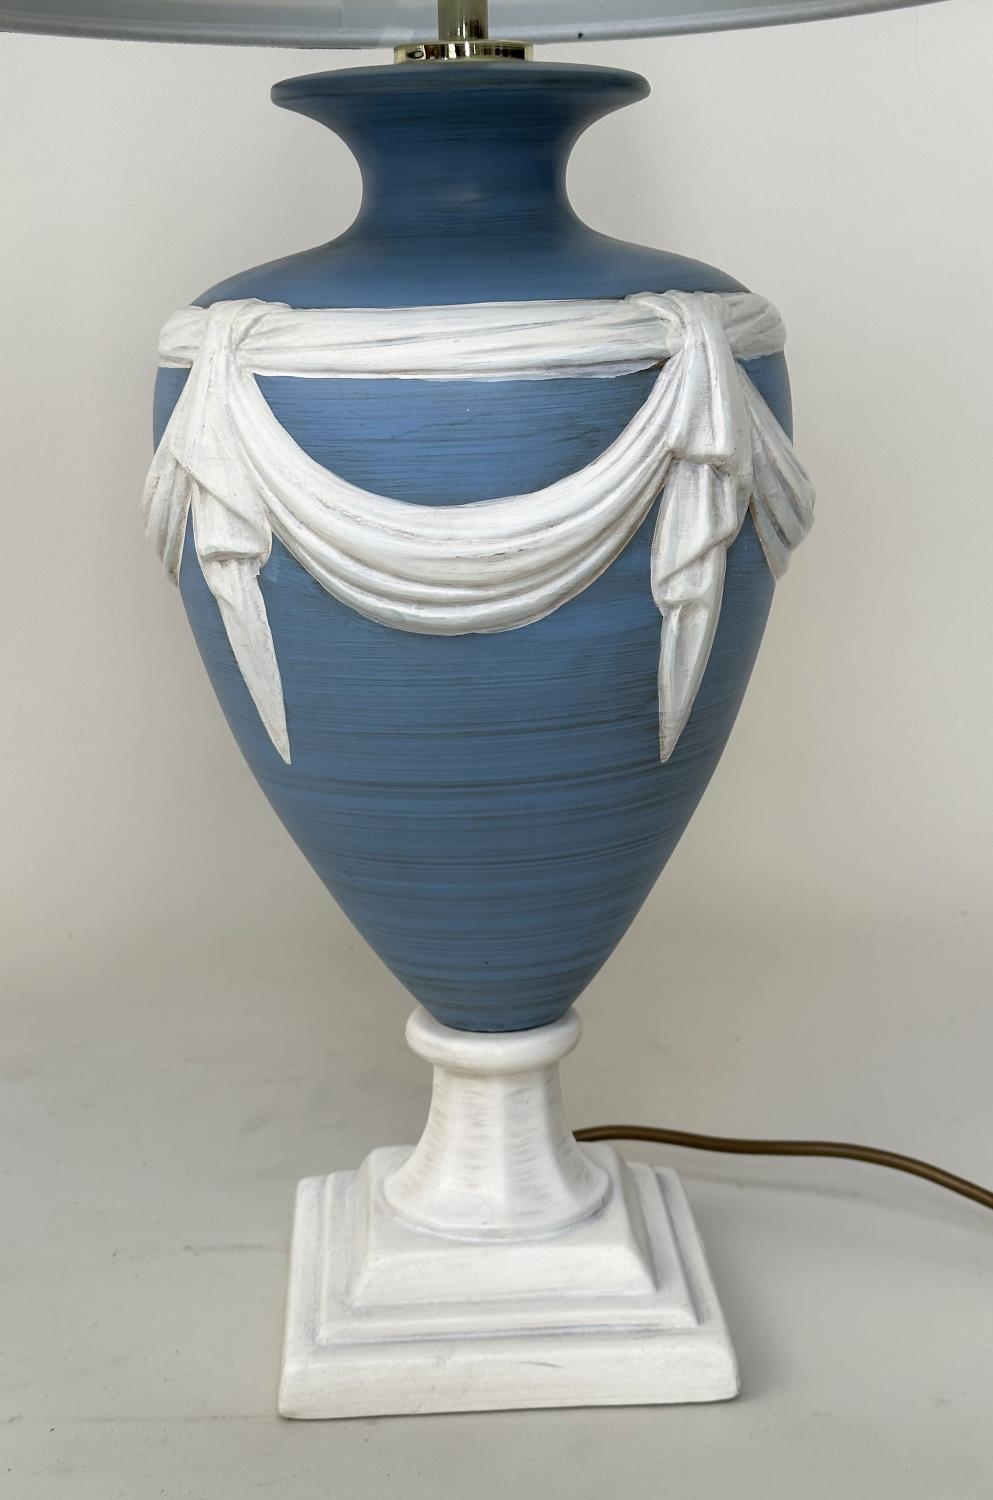 TABLE LAMPS, a pair, Wedgwood jasperware style of vase form with shades, 70cm H. - Image 3 of 12